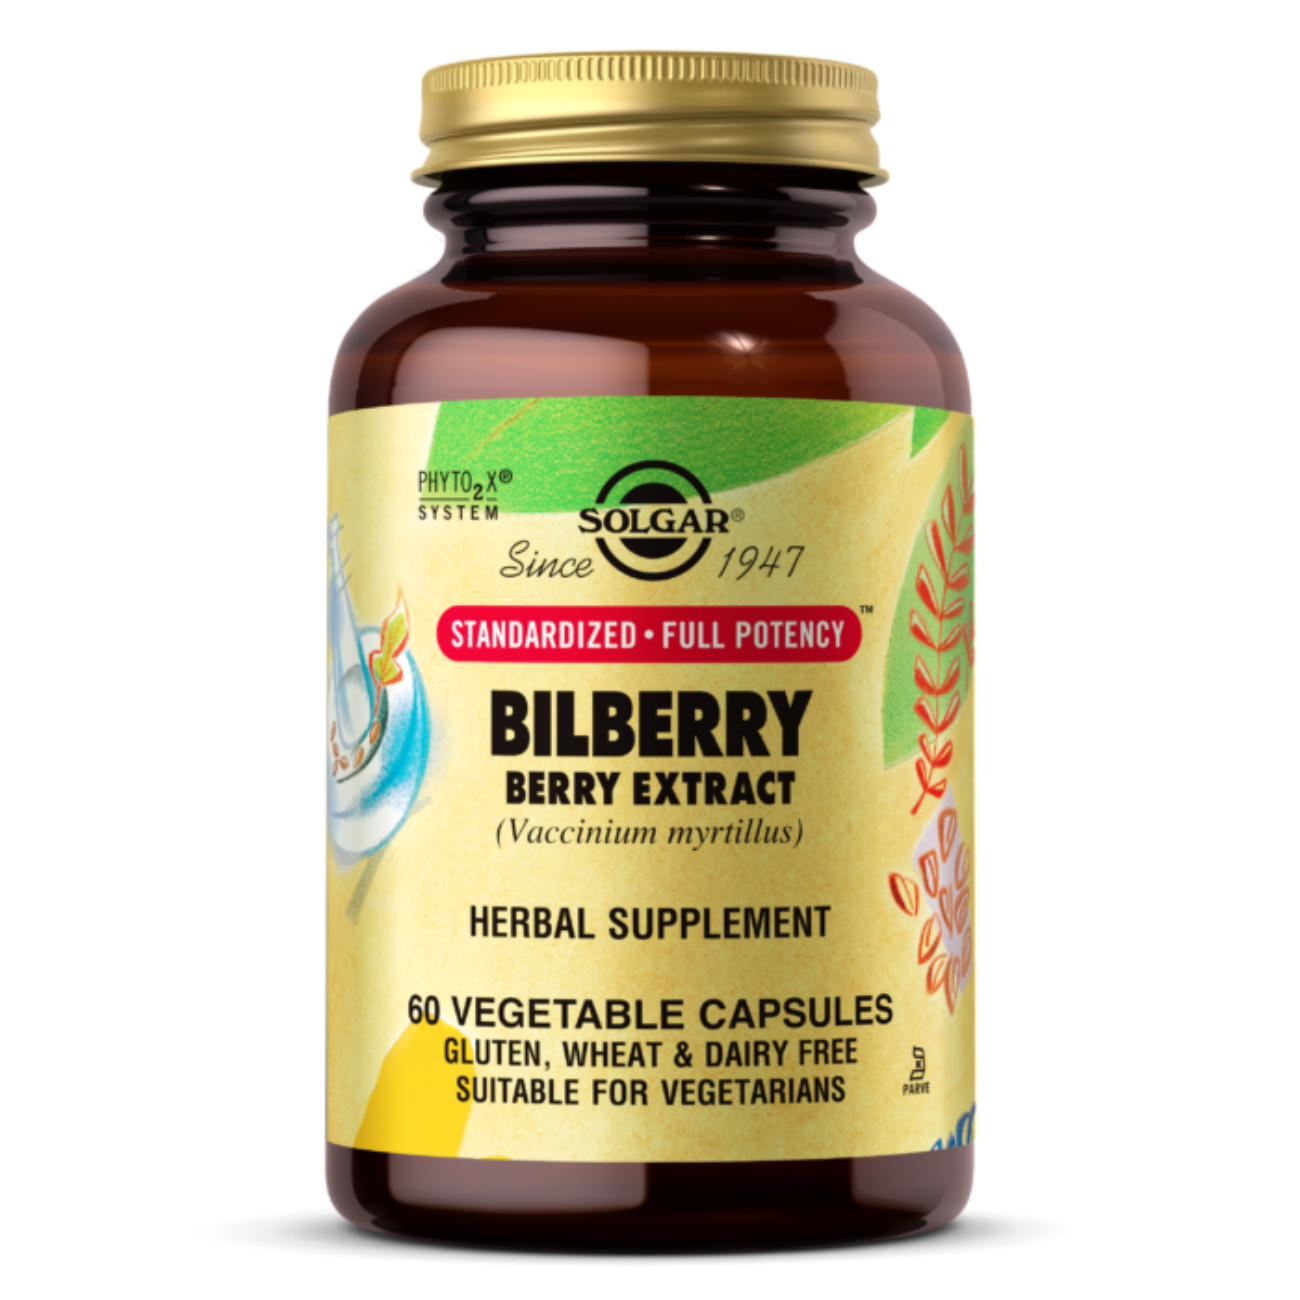 Bilberry Berry Extract with Blueberry - 60 Vegetable Capsules